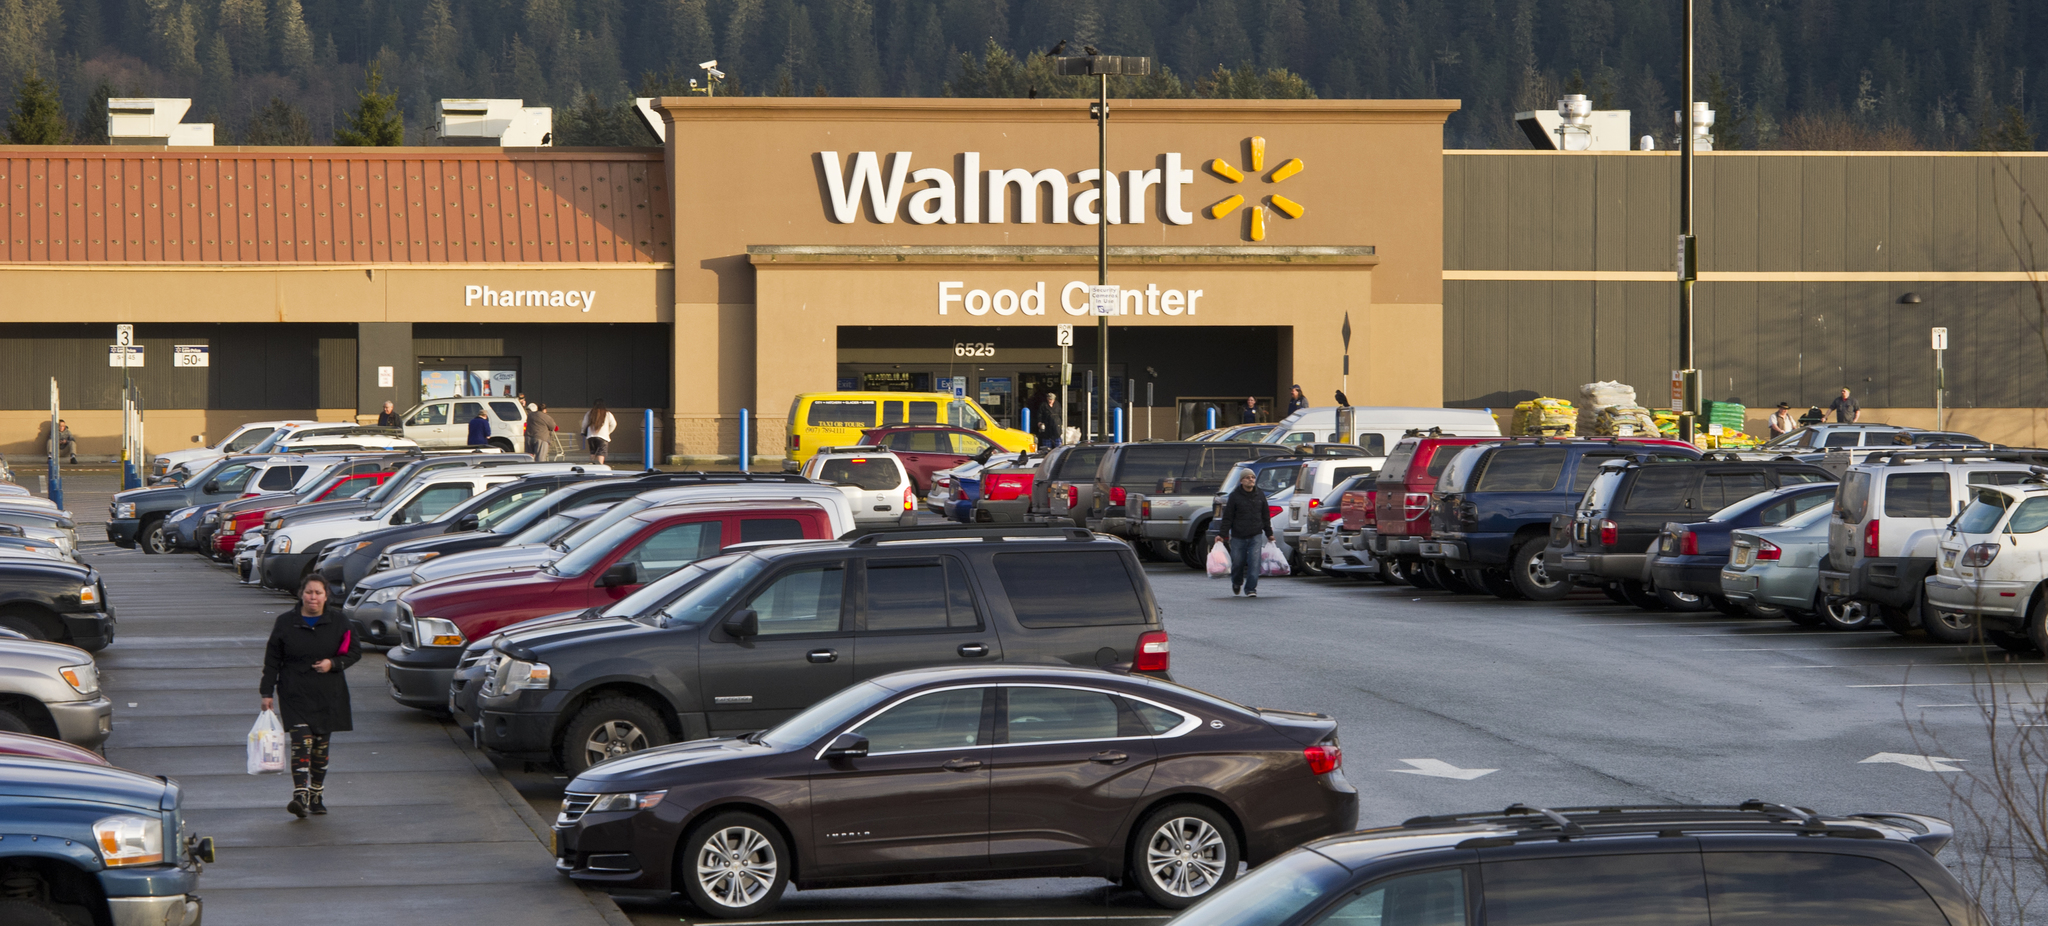 In this file photo from January 2016, vehicles fill the Juneau Walmart parking lot on the first day of its going out of business sale. Juneau’s Walmart, which has been open since 2007, was among 154 stores in the U.S. being “pruned” from the corporate tree, according to Walmart spokesperson Delia Garcia. About 180 Juneau residents lost their jobs. (Michael Penn | Juneau Empire File)